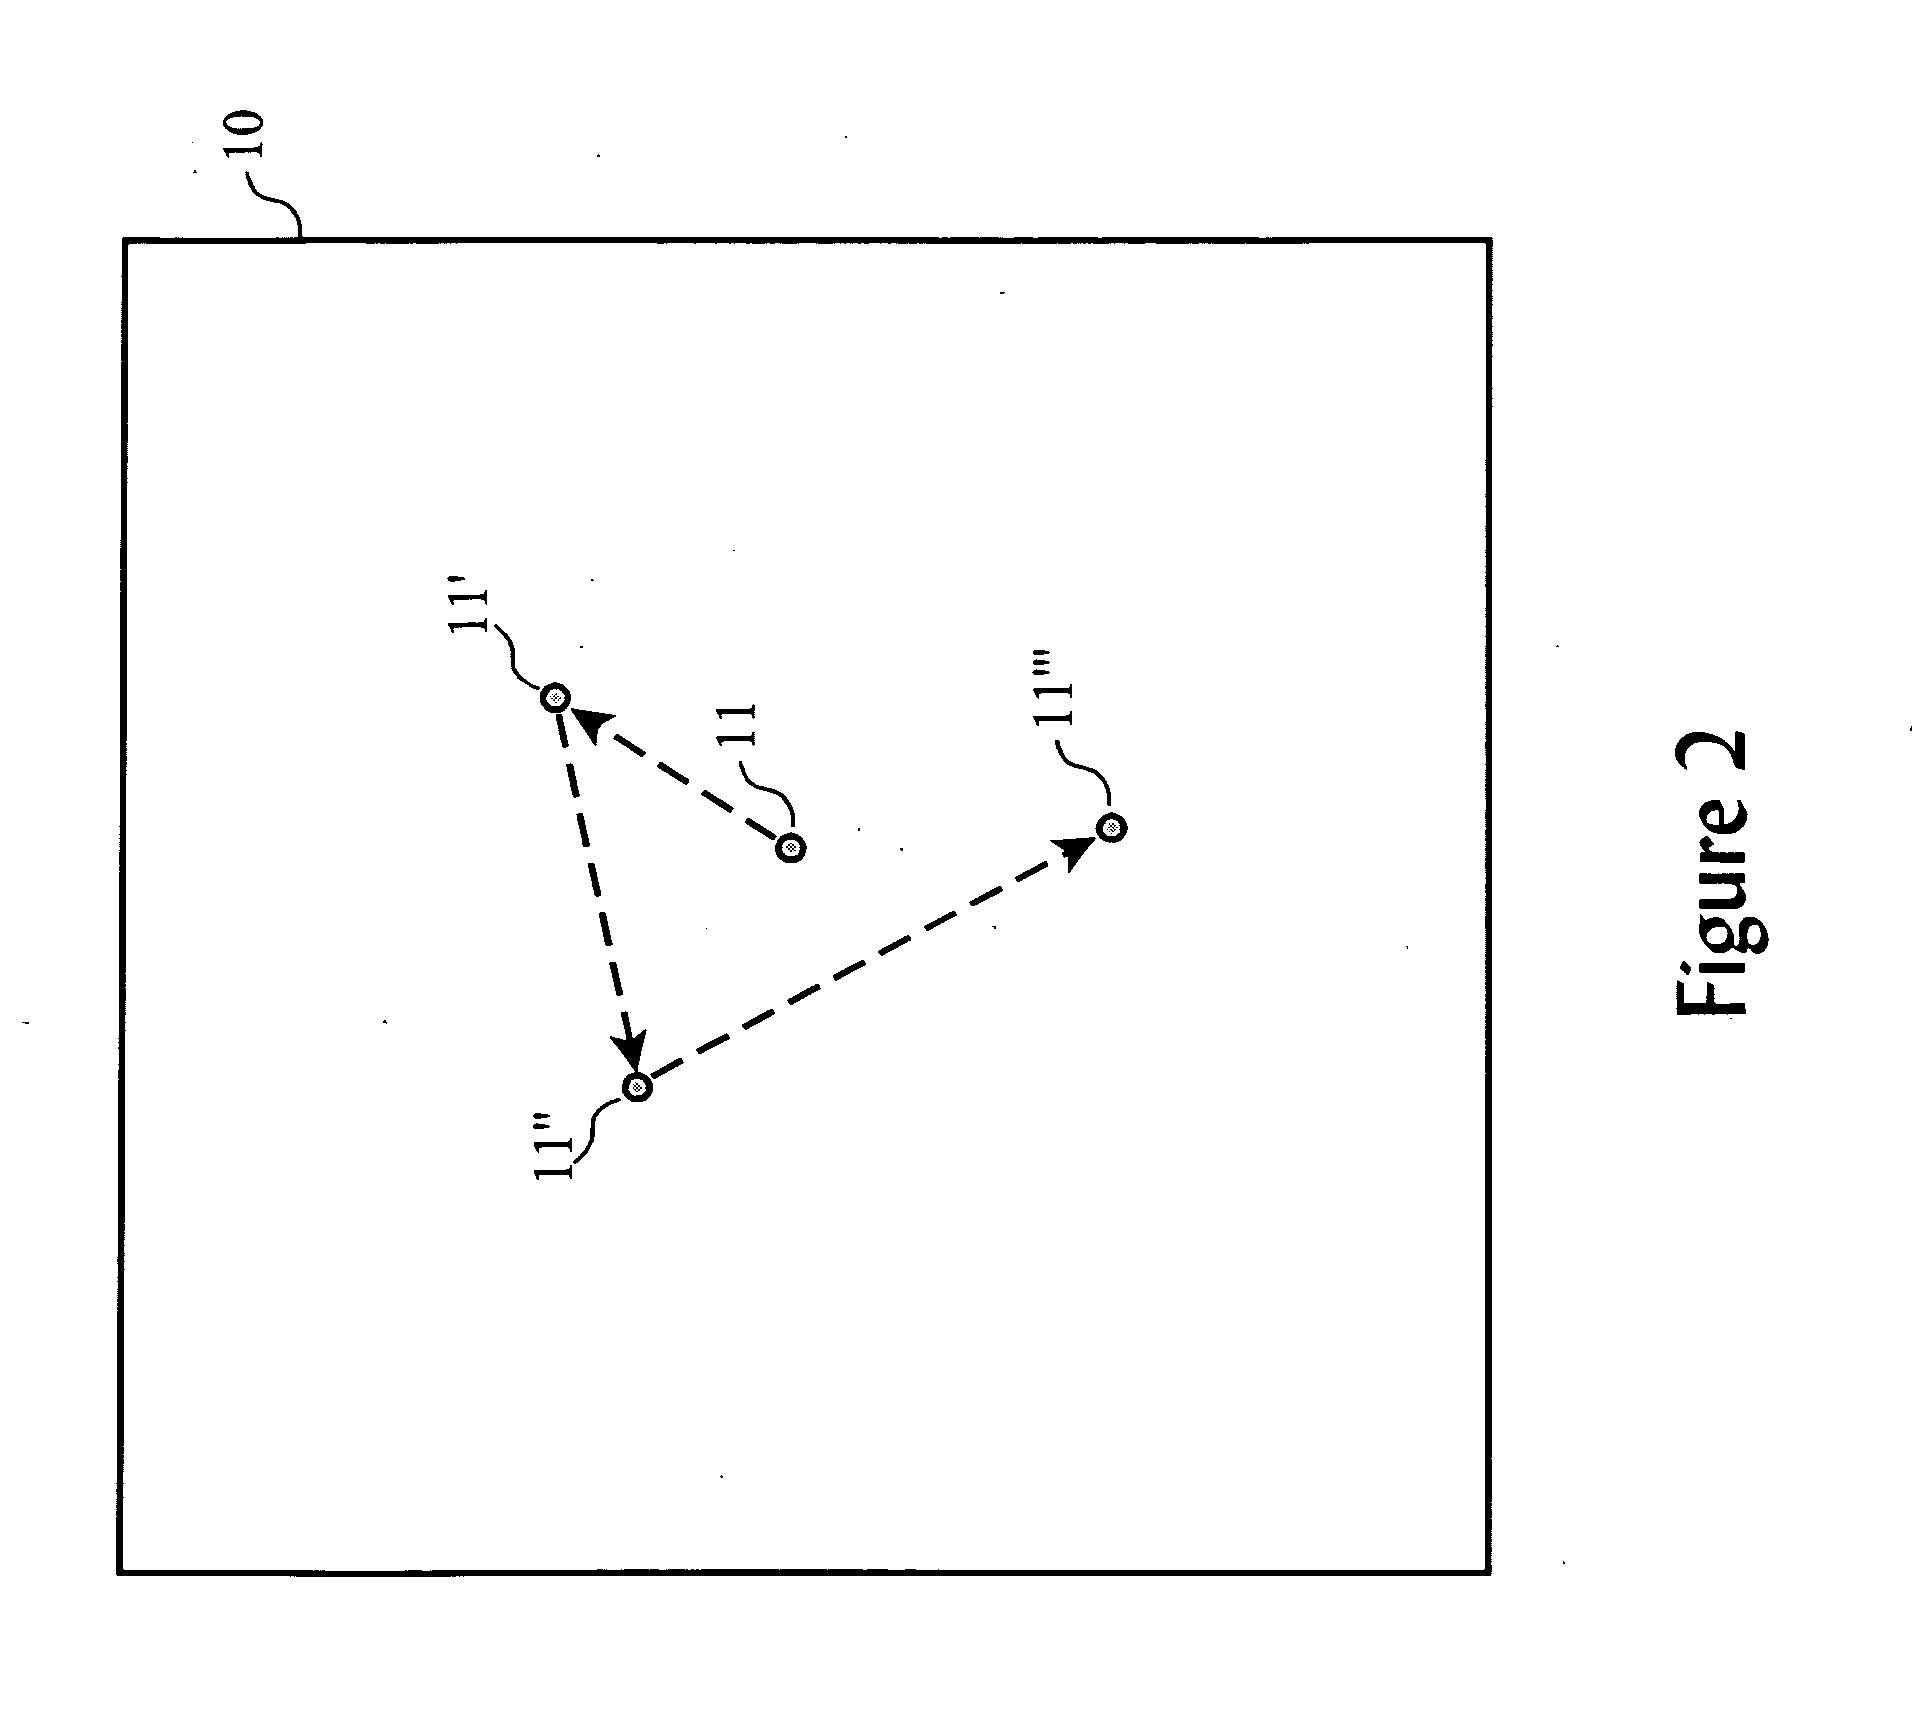 System and method for demonstrating and investigating brownian motion effects on a diamagnetically suspended particle